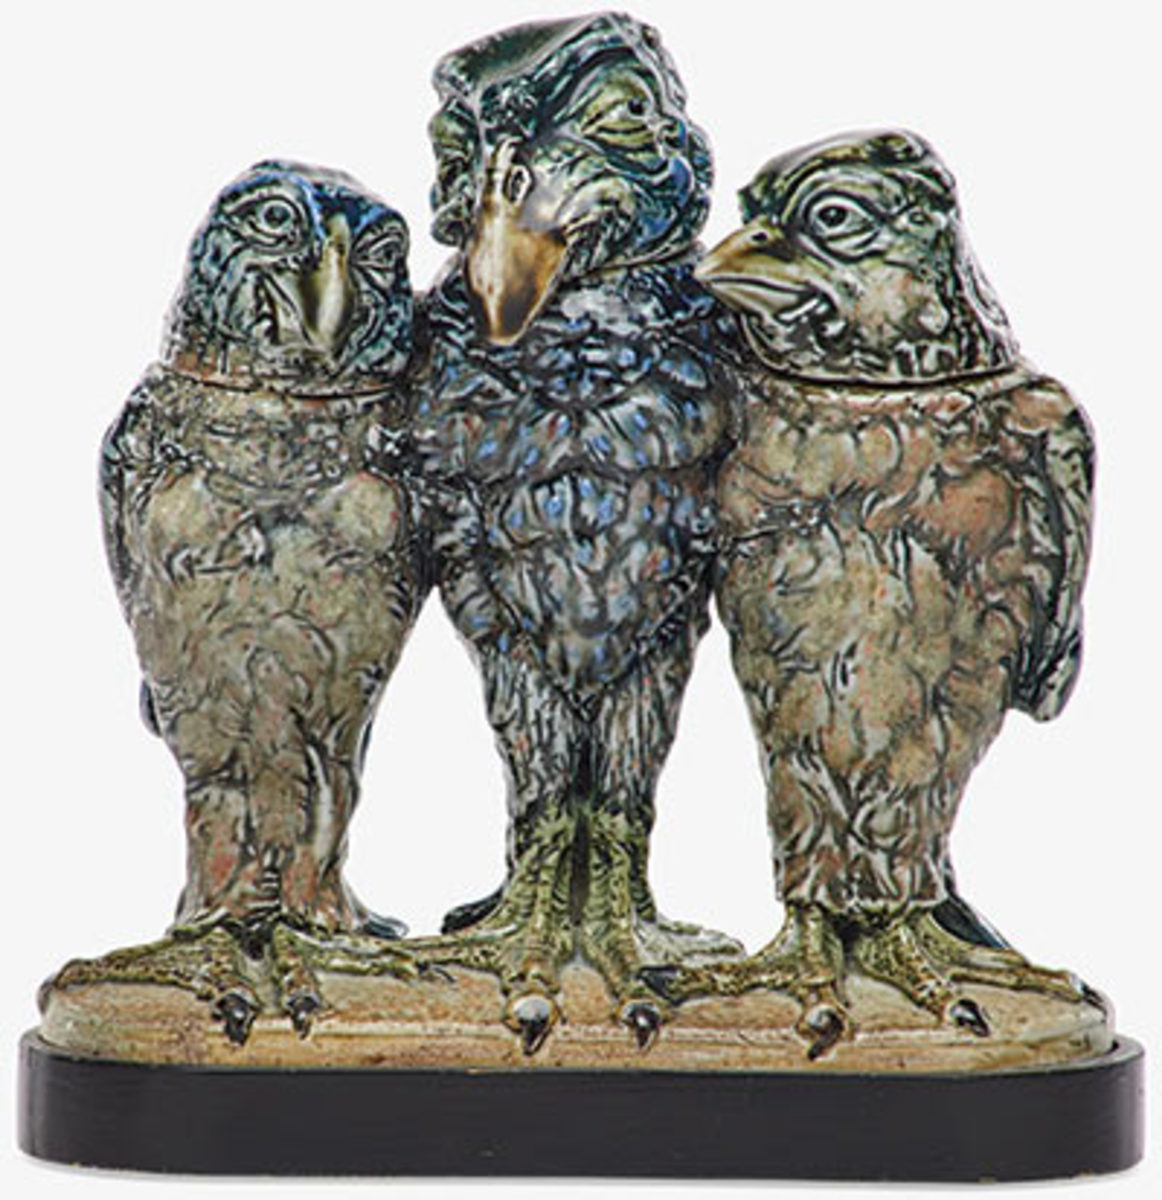  These birds even side-eye each other. The triple-bird tobacco jar sold for $52,500.